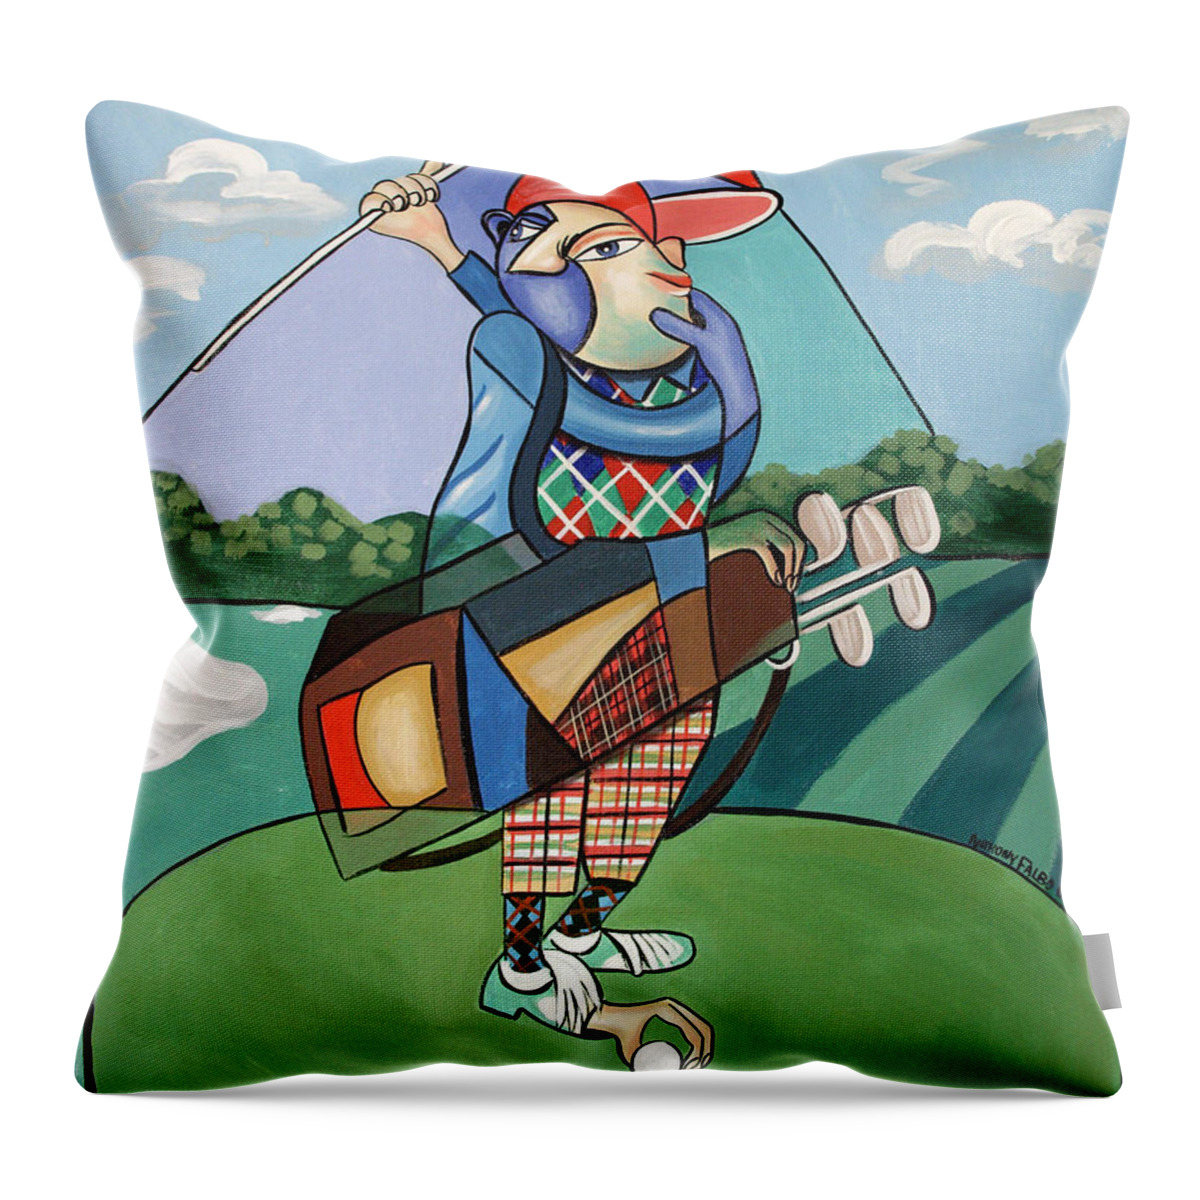 Hole In One Throw Pillow featuring the painting Hole In One by Anthony Falbo